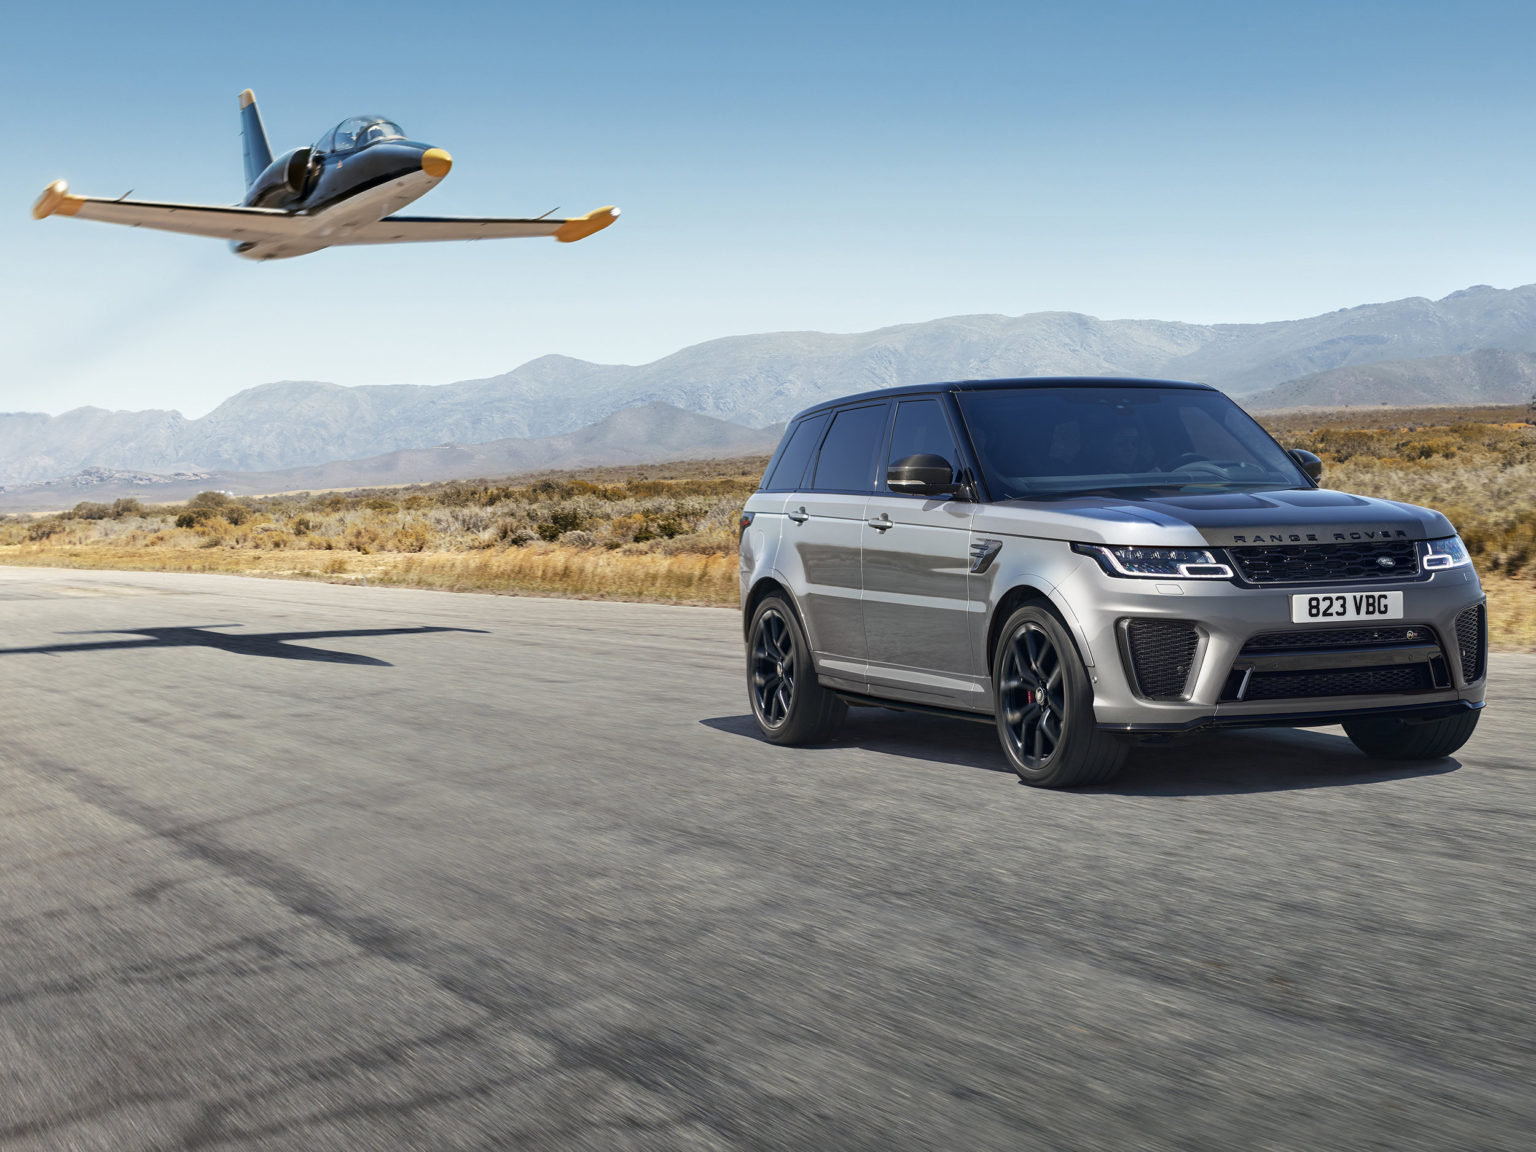 The new Range Rover builds on the current 2020 Range Rover Sport SVR offering.